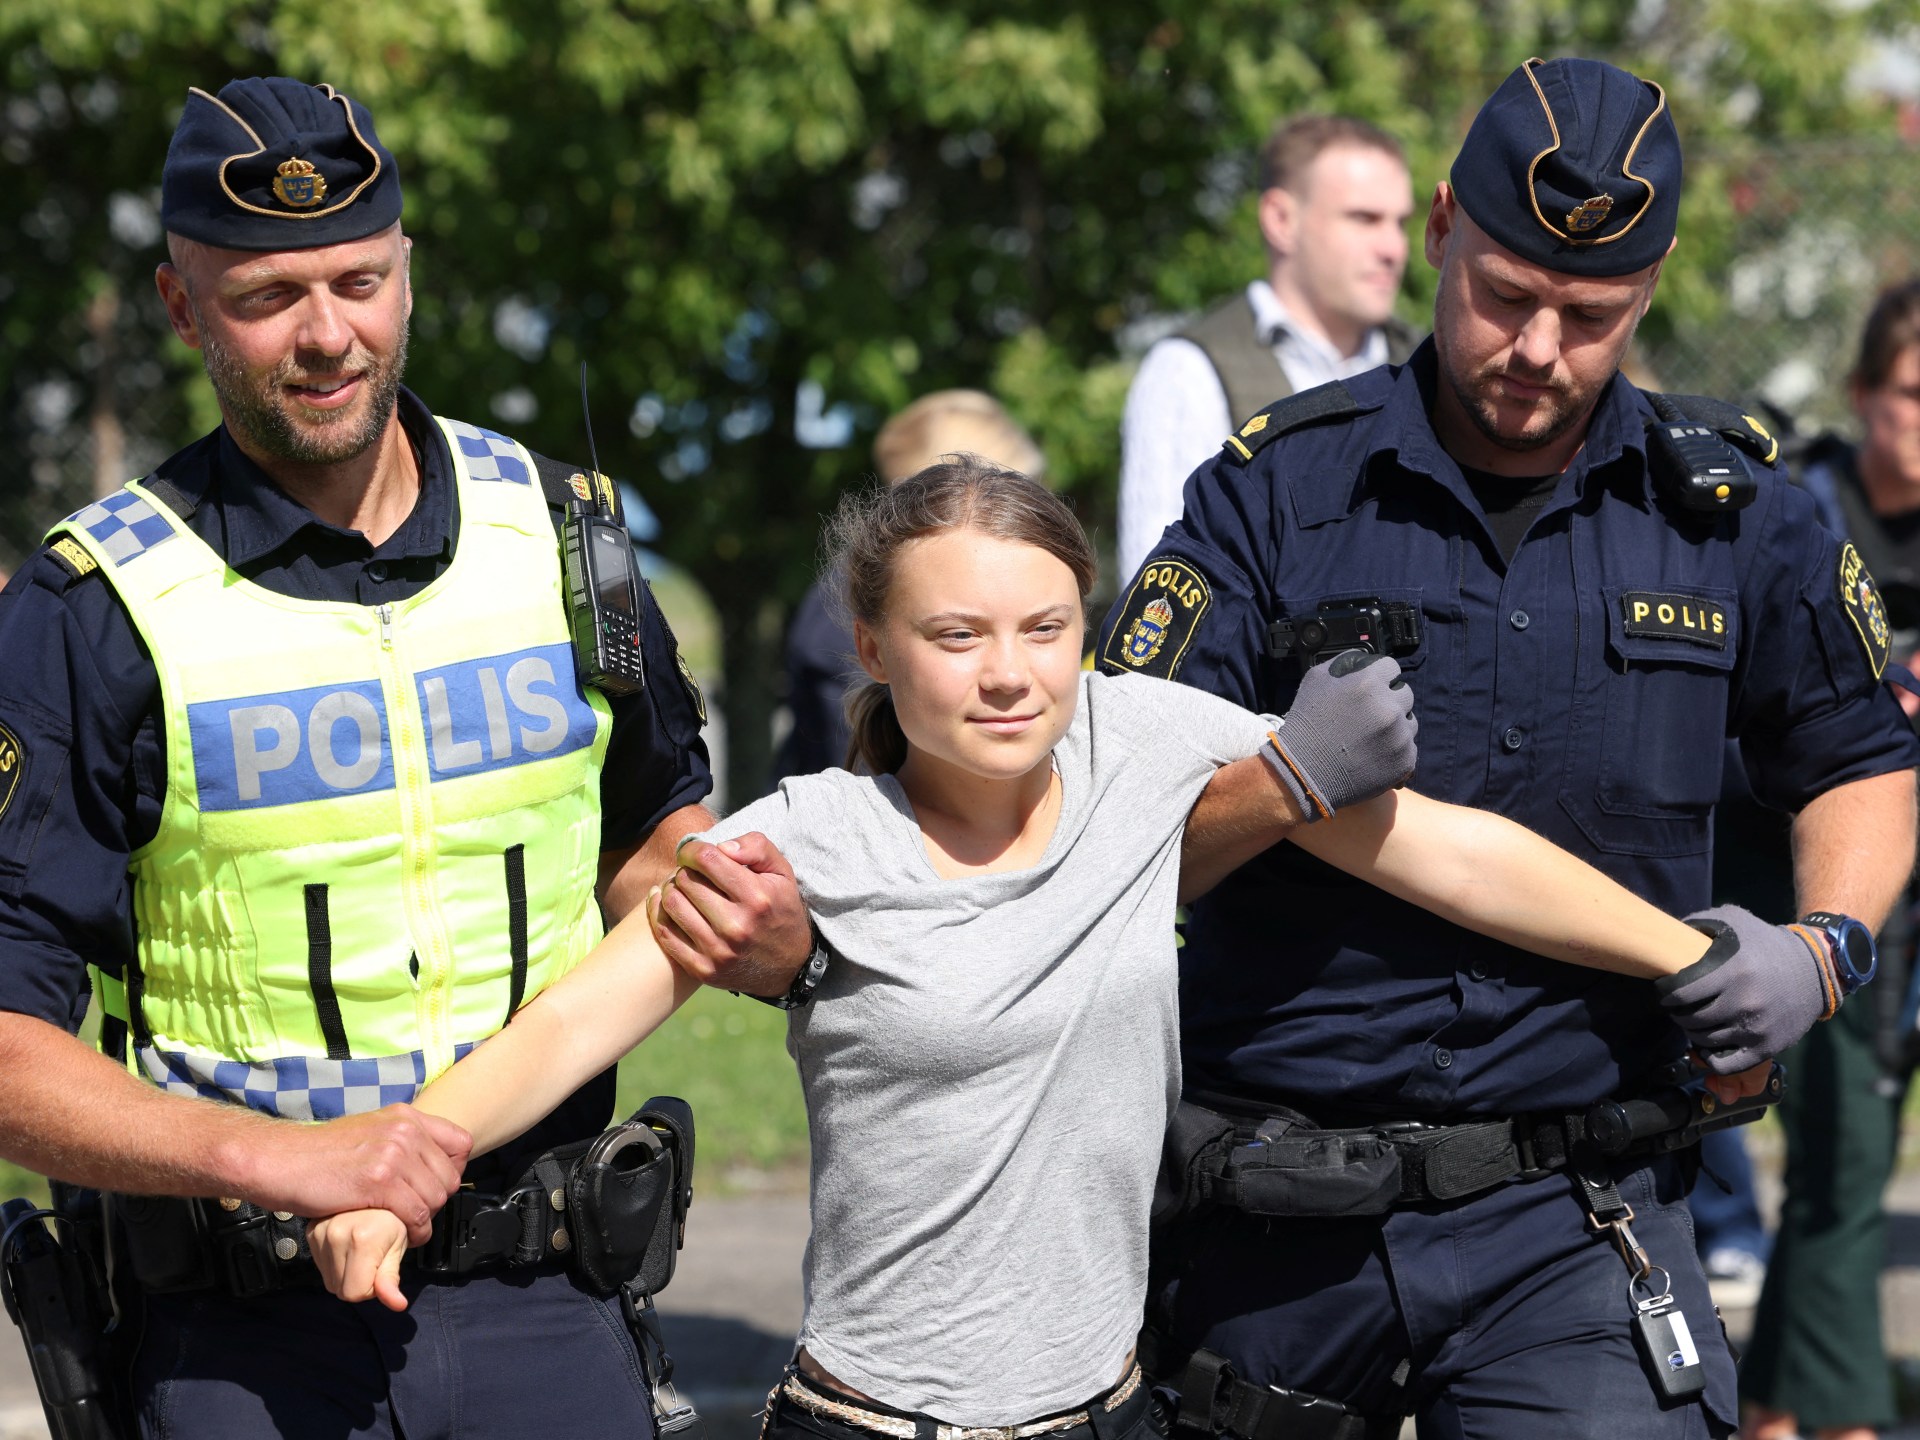 Climate activist Greta Thunberg detained twice at Dutch protest | Climate Crisis News